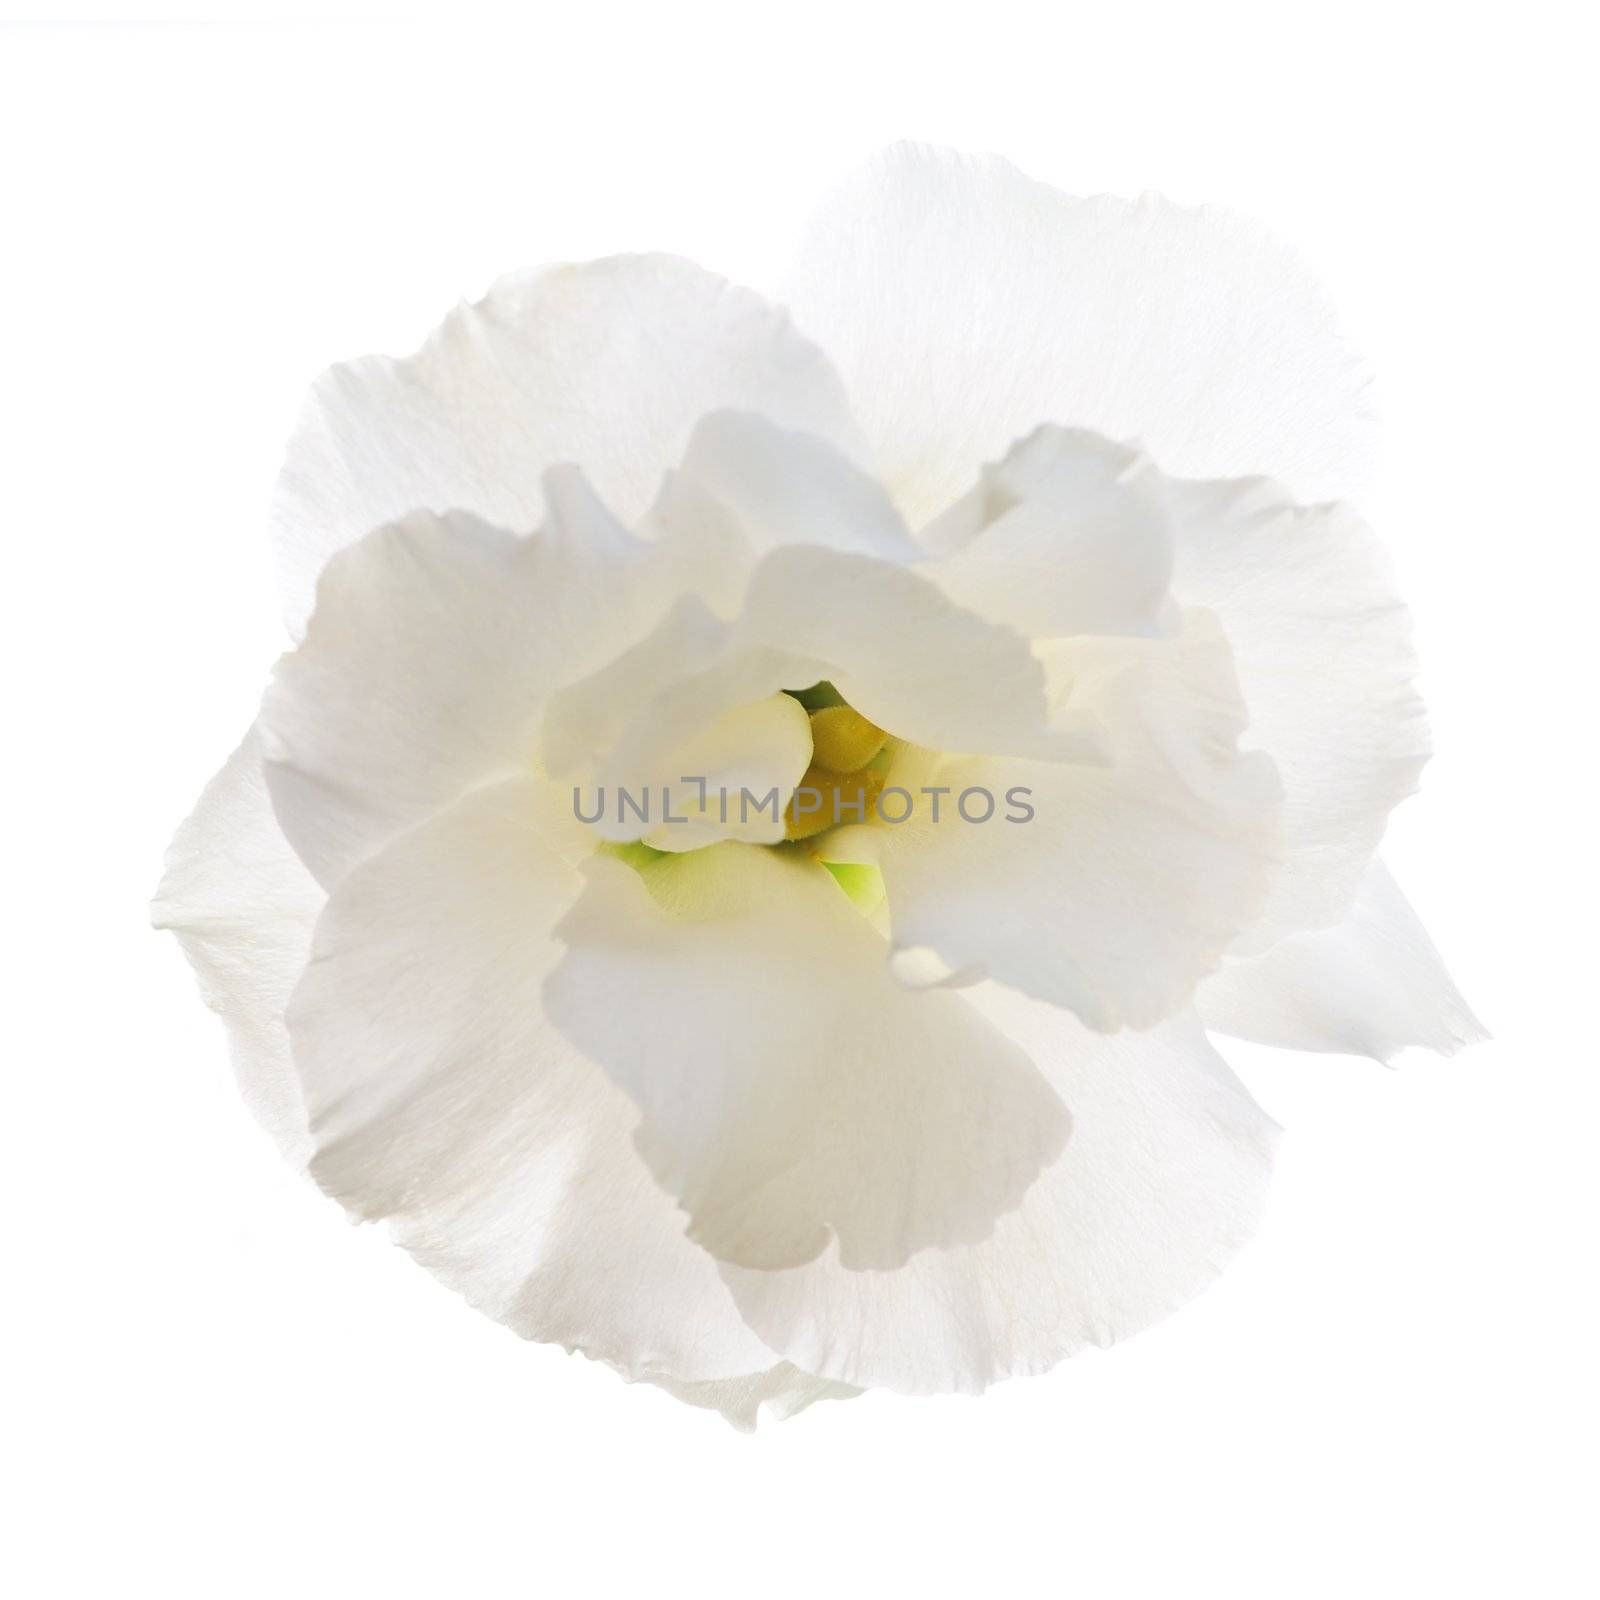 Flower called prairie rose isolated on white background